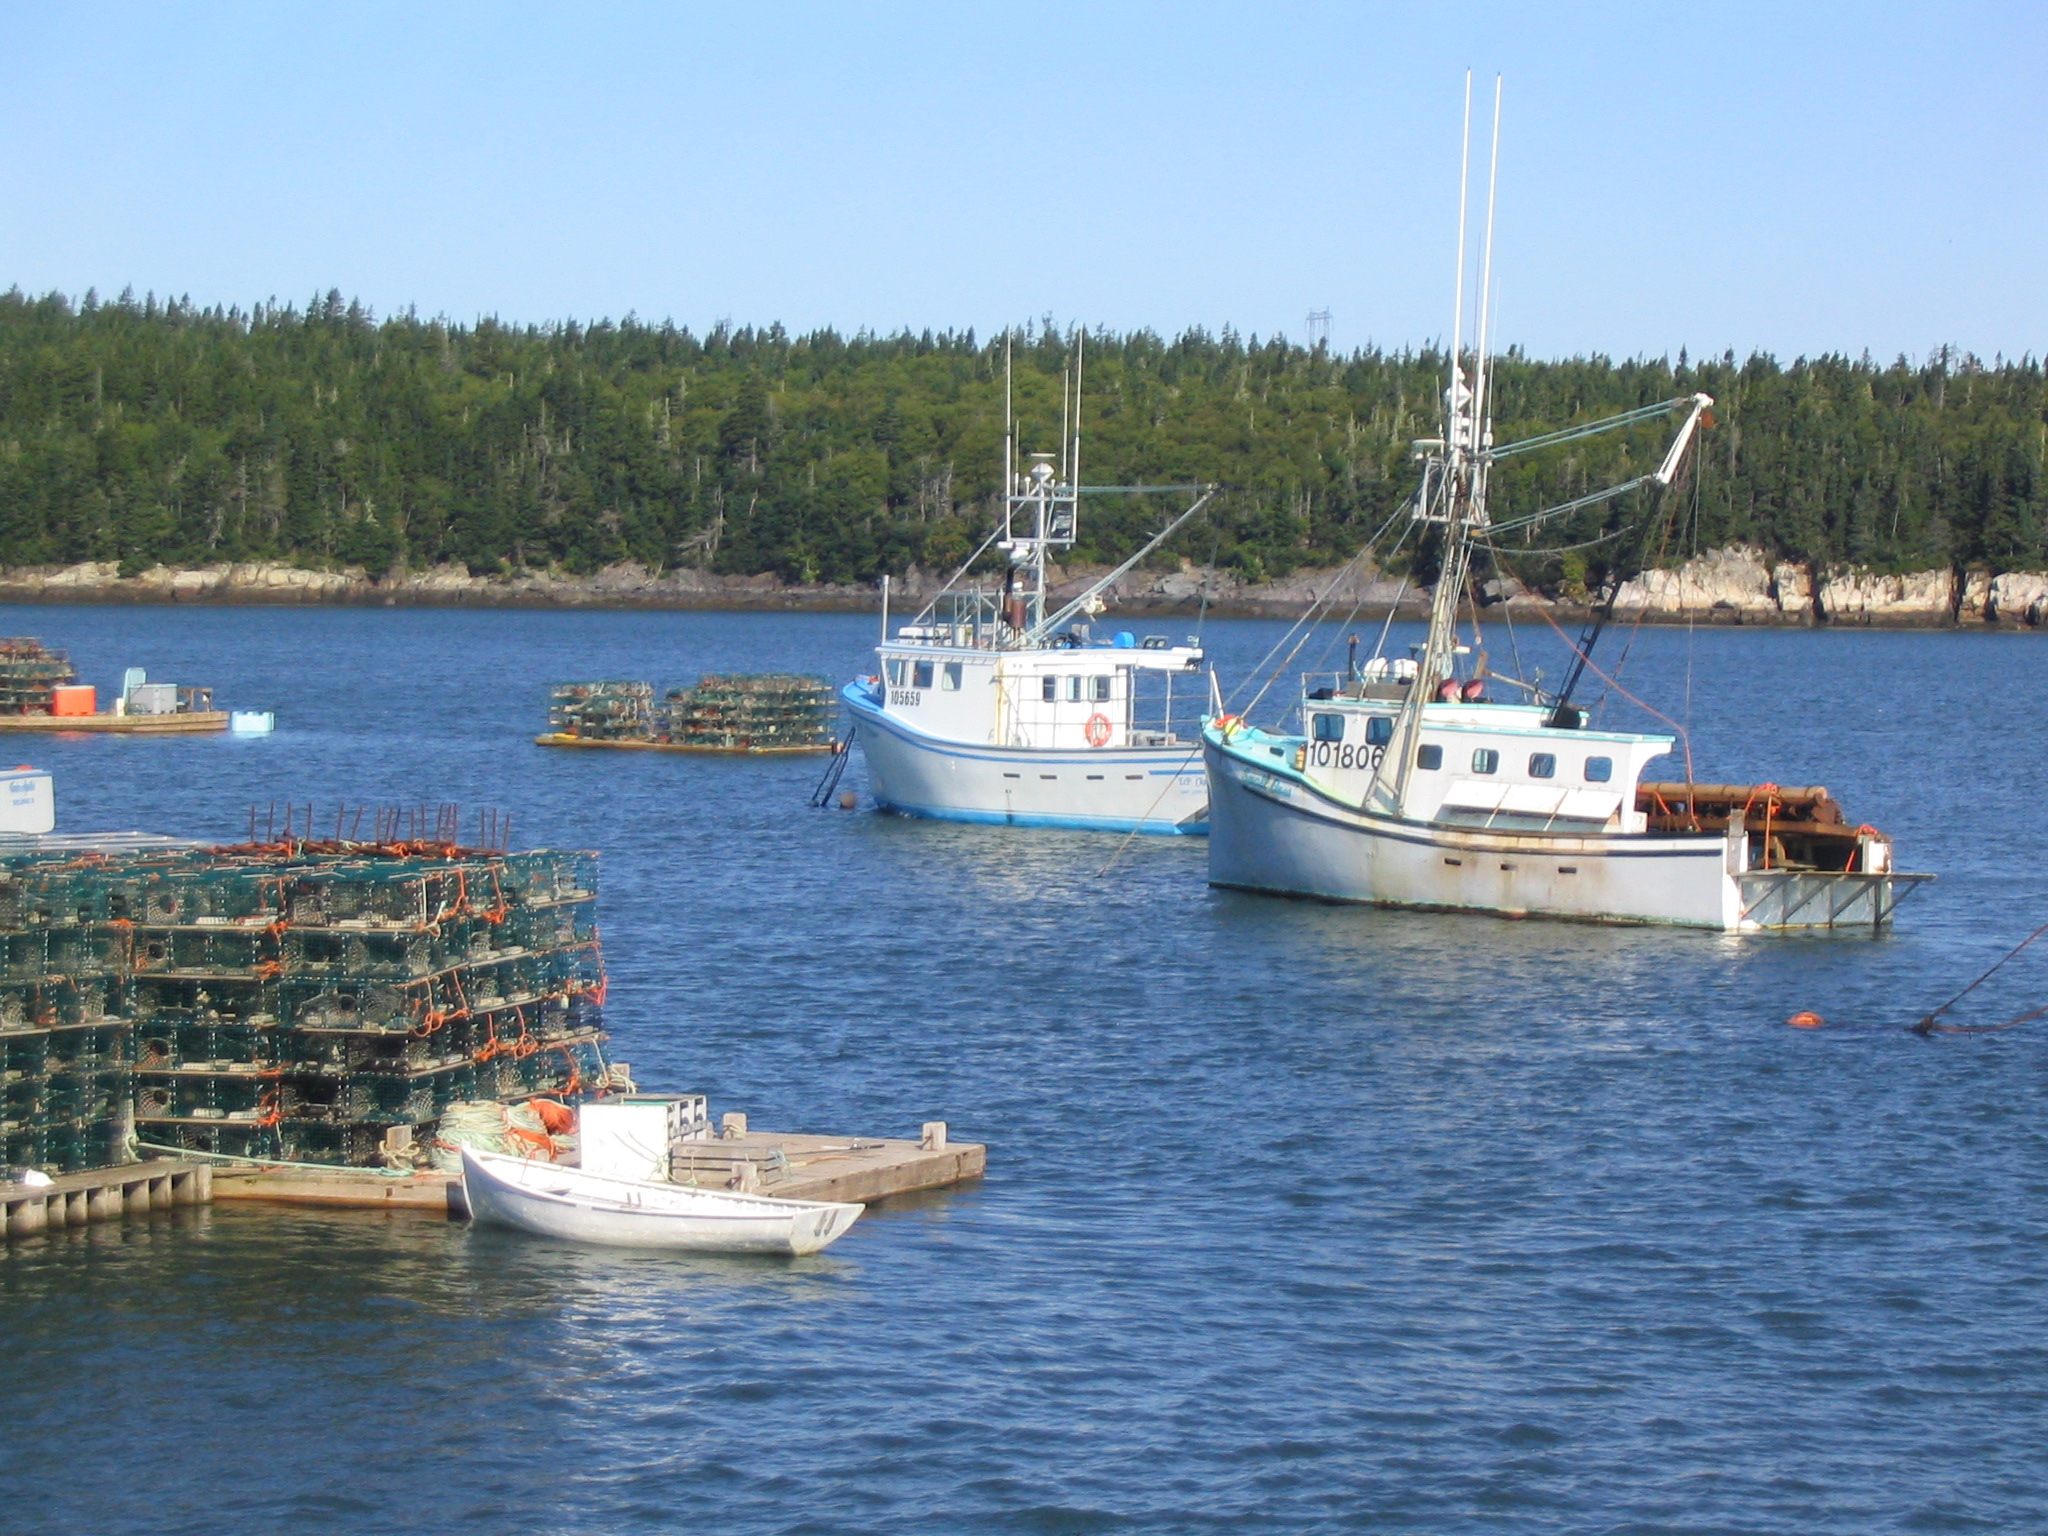 Moving forward on lobster fishery means addressing access and conservation